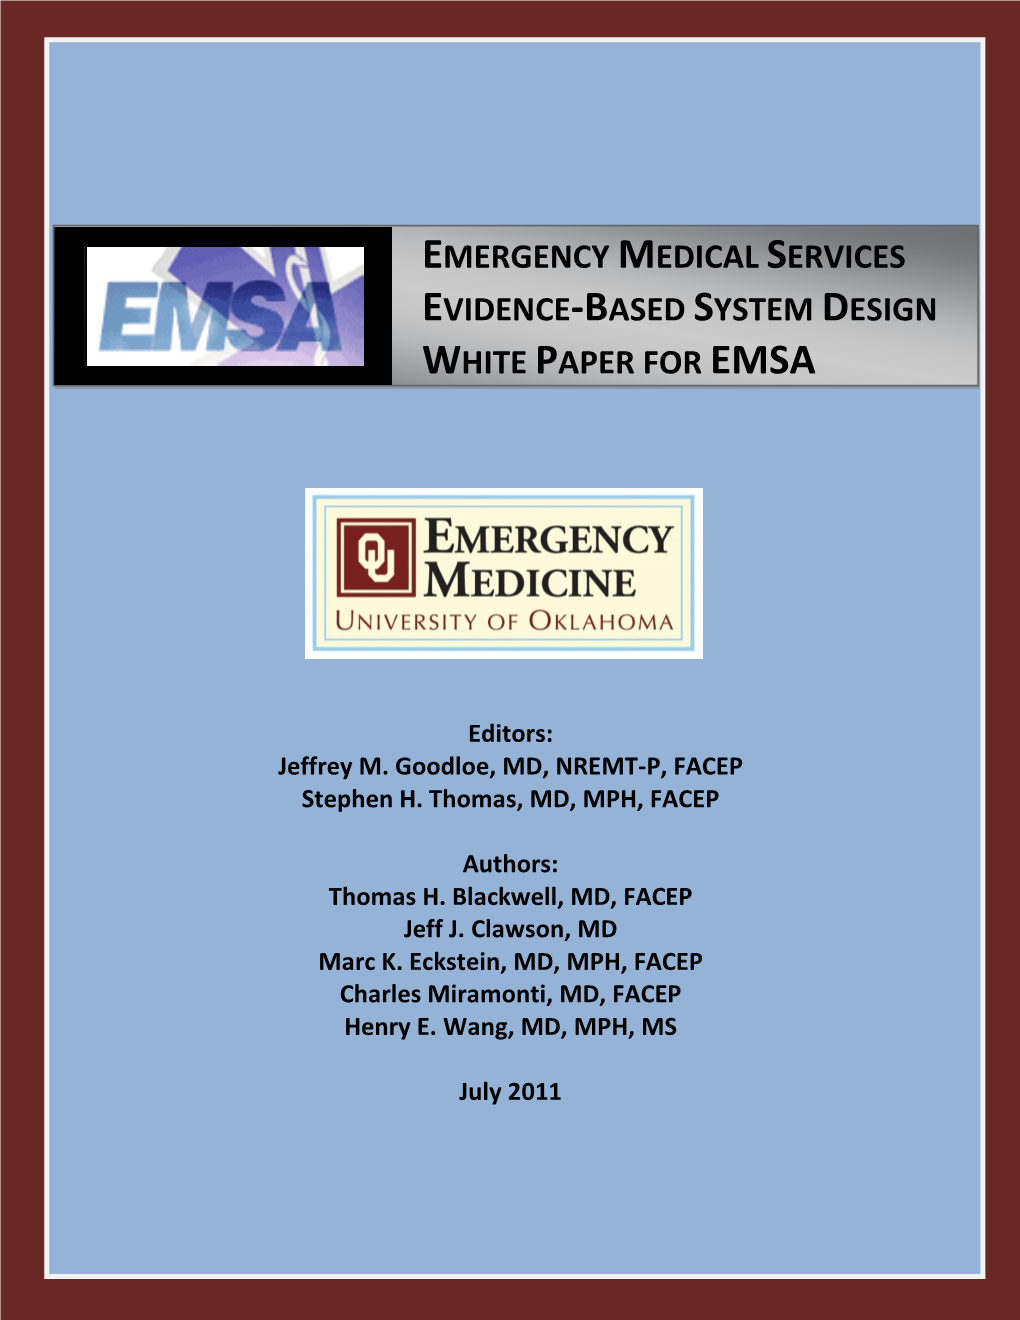 Analysis of Tulsa Fire Department Emergency Medical Services